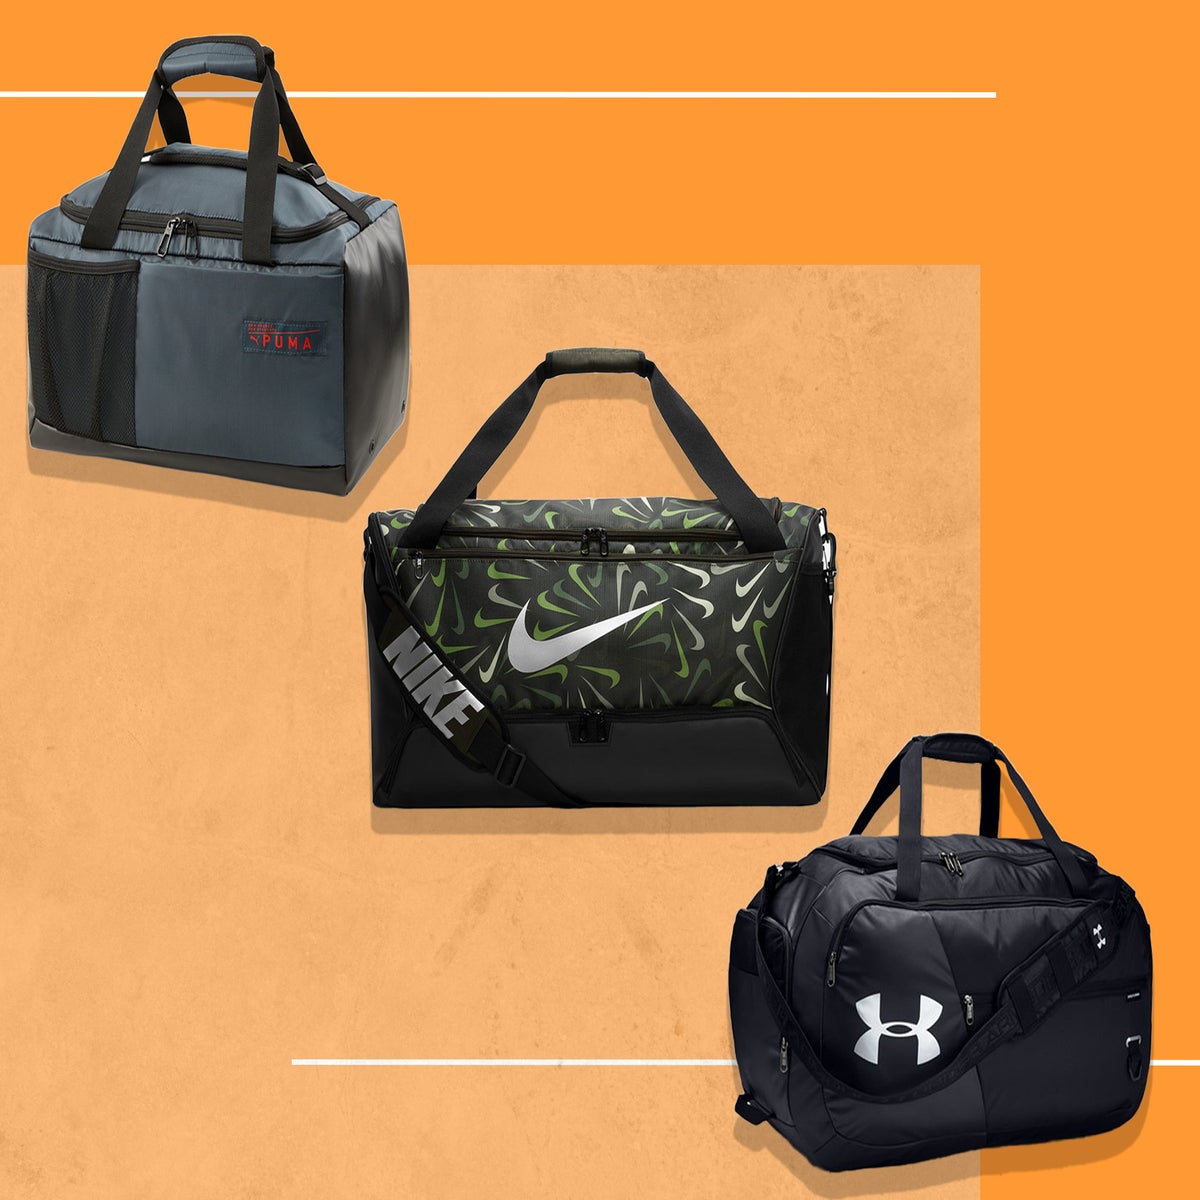 21 Best Gym Bags for Women 2022: Head To Your Workout Class In